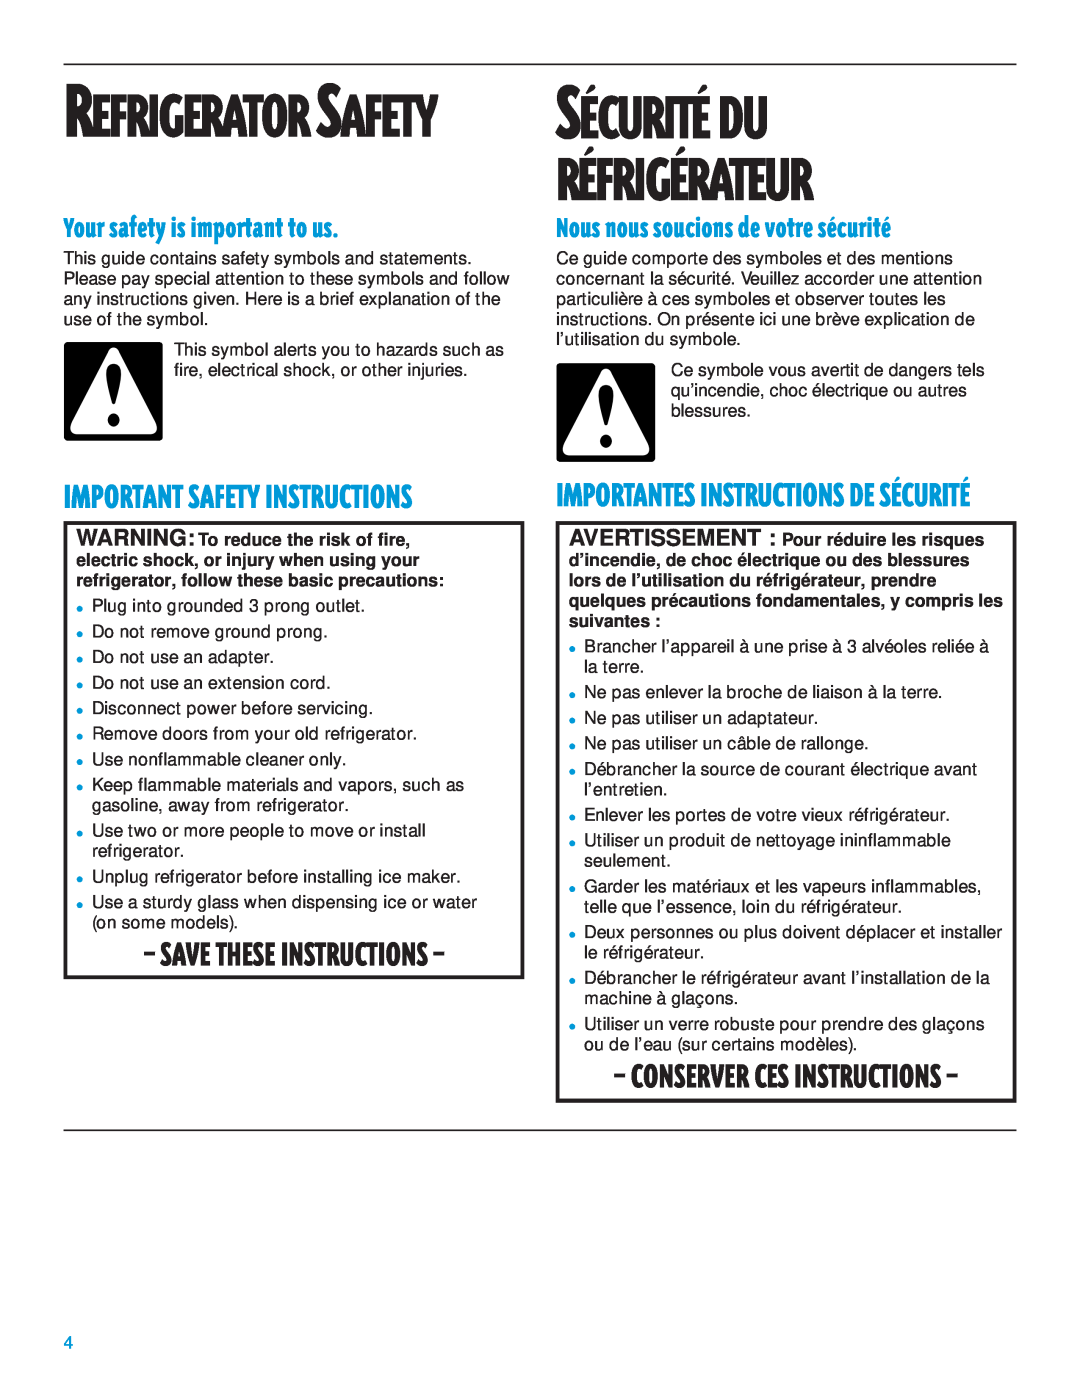 Whirlpool 2195385 manual SƒCURITƒ DU, RƒFRIGƒRATEUR, Refrigerator Safety, Your safety is important to us 